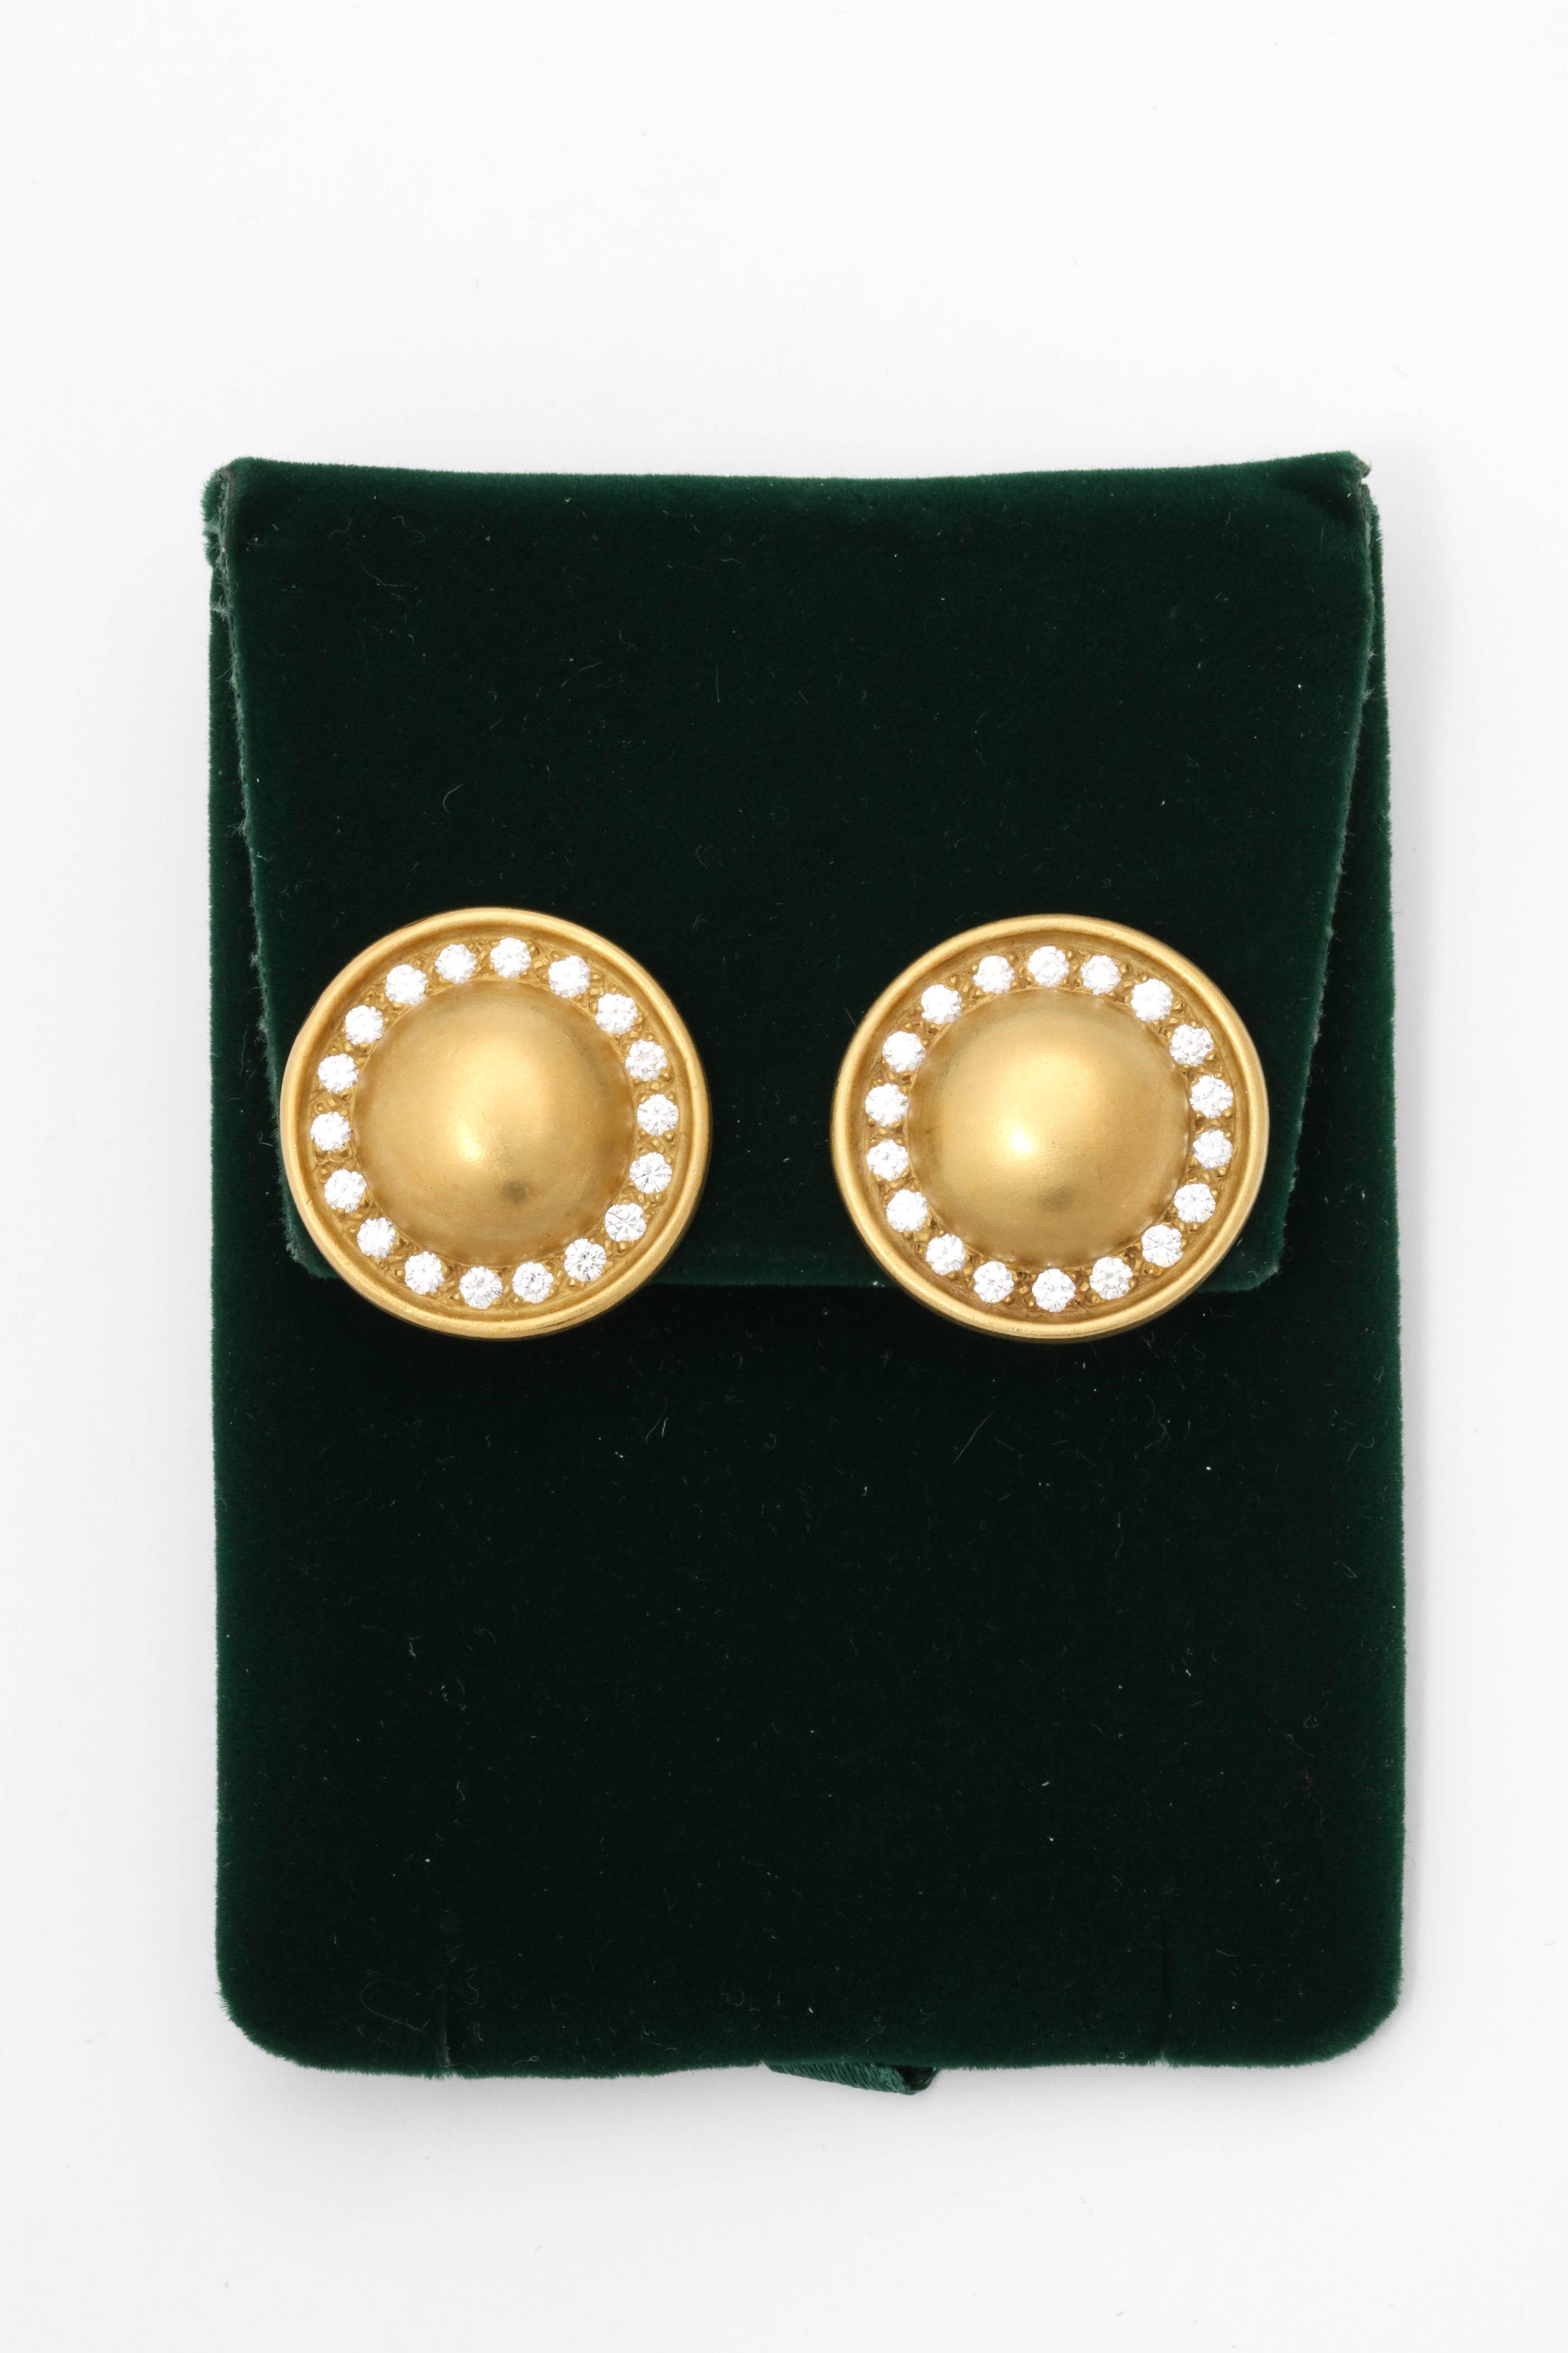 One Pair Of Ladies 18kt Green Gold [Typical Color Of Barry Kieselstein Cord Jewelry], Designed In A Circular Form With Gold Ball Centers. Earclips Are Further Embellished With [36] Full Cut Diamonds Weighing Approximately 2 carats Total